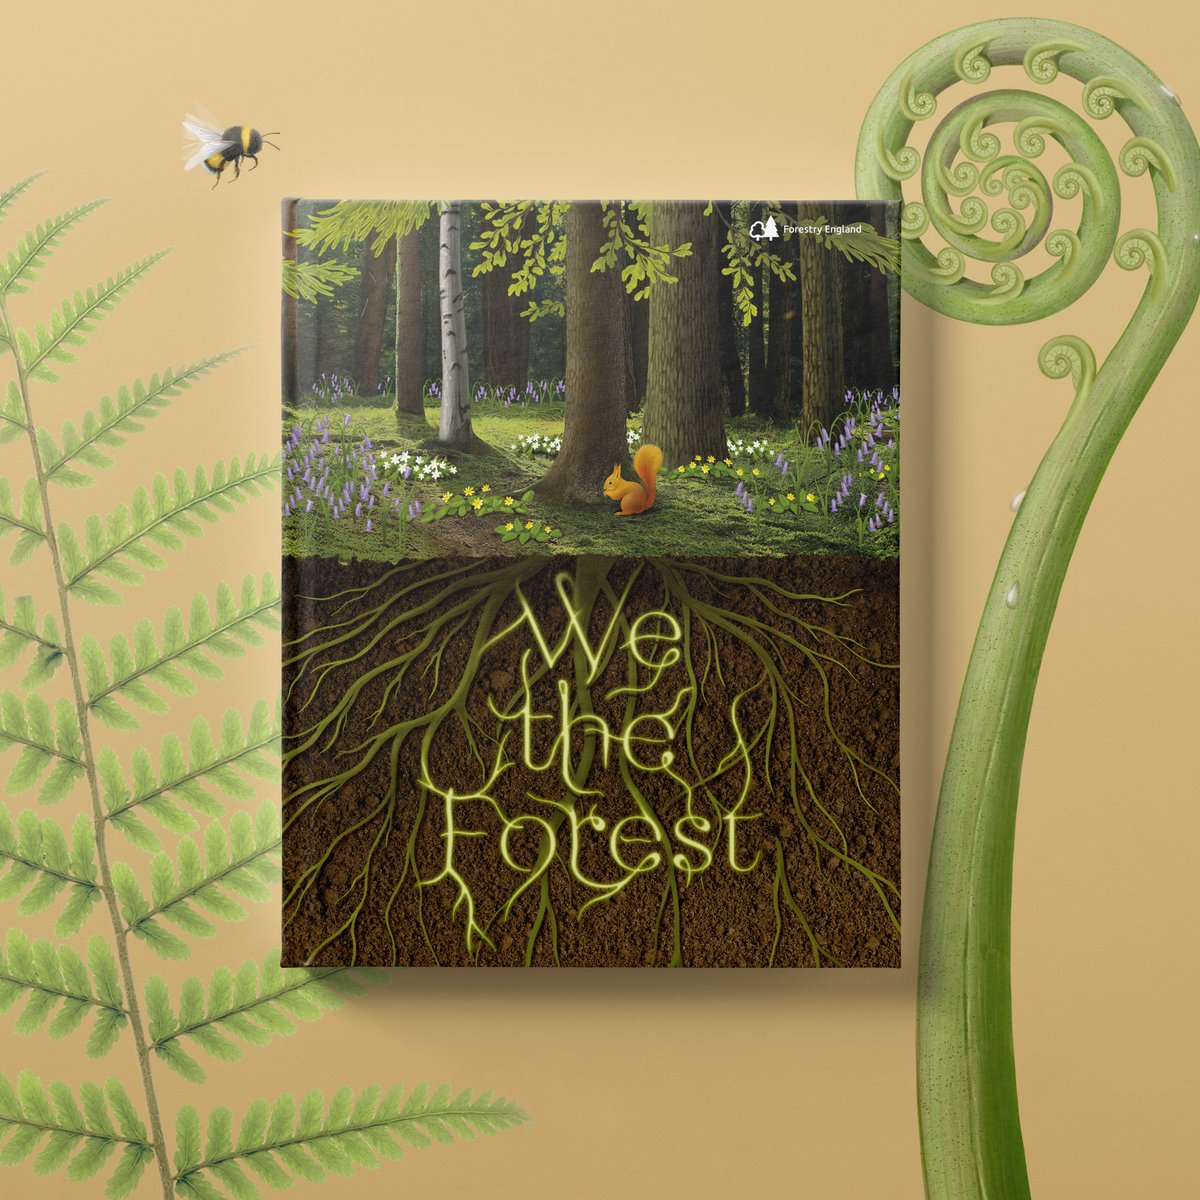 Rewild young minds with We the Forest 📖 This joint publication with @cultureshockit invites children to explore the ins and outs of the forest ecosystem by bringing the natural world to life through art and science 🌳 Find out more 👉 forestryeng.land/we-the-forest